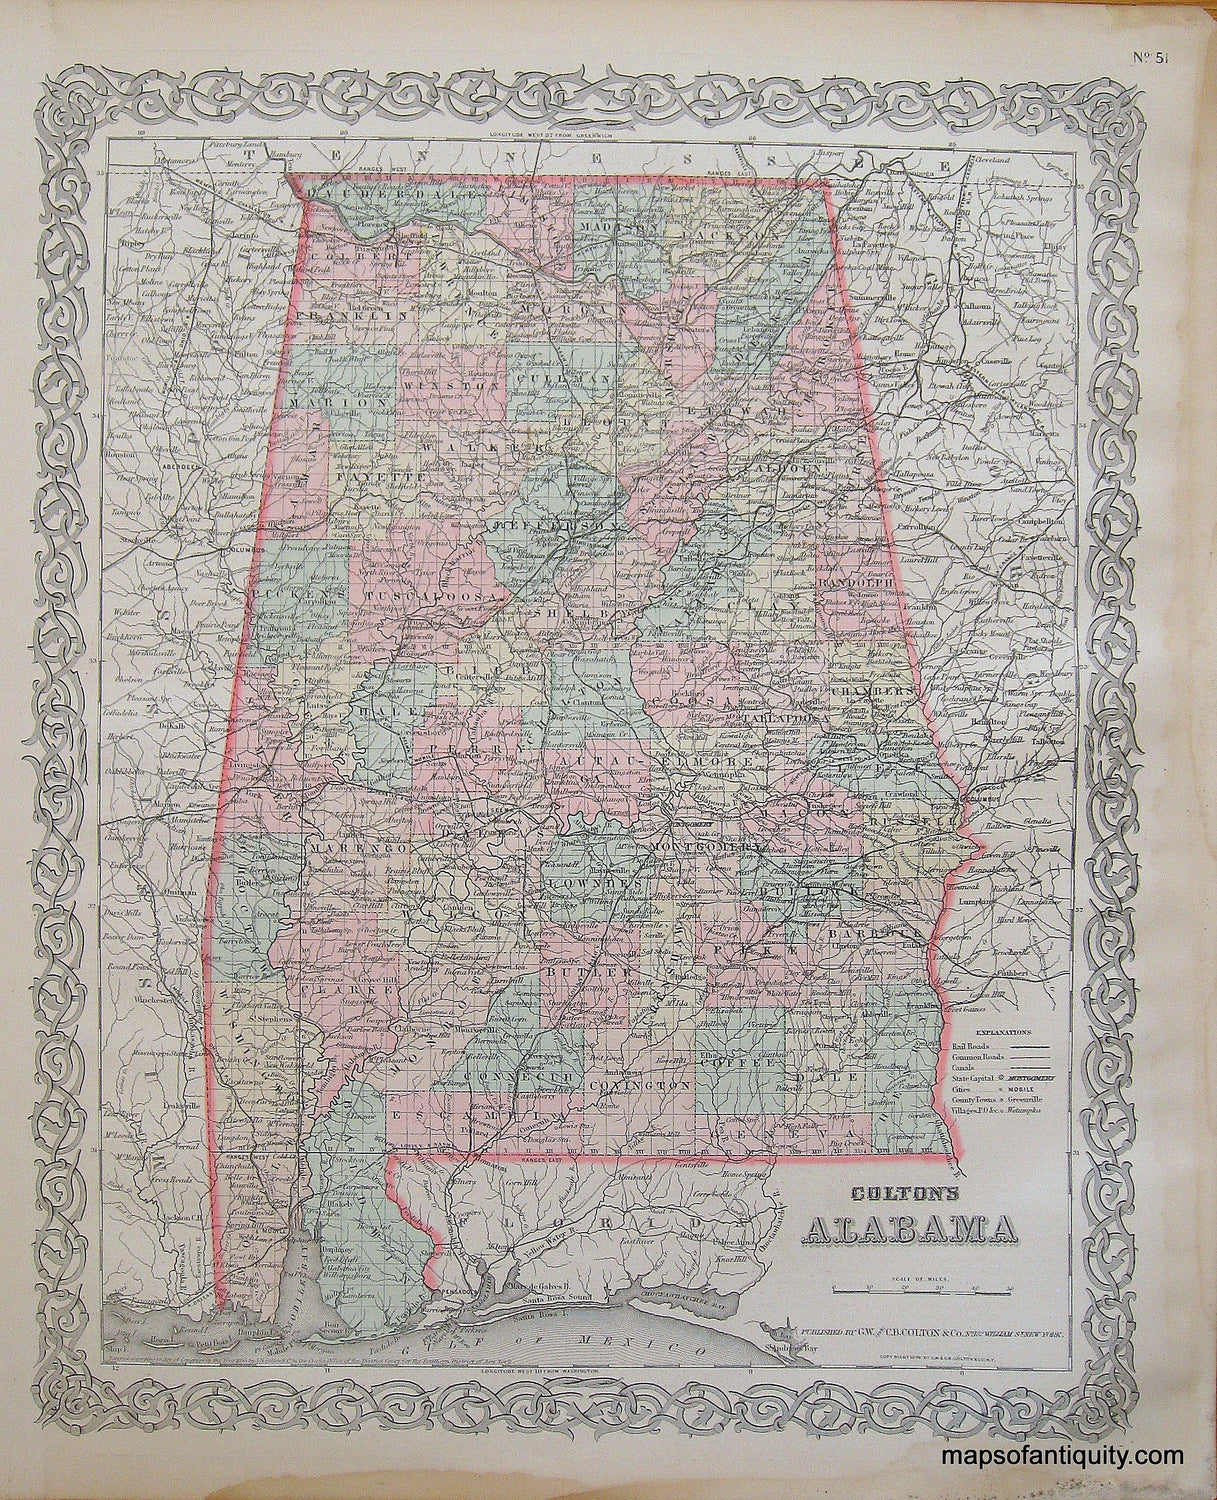 Antique-Hand-Colored-Map-Colton's-Alabama-********-United-States-Alabama-1887-Colton-Maps-Of-Antiquity